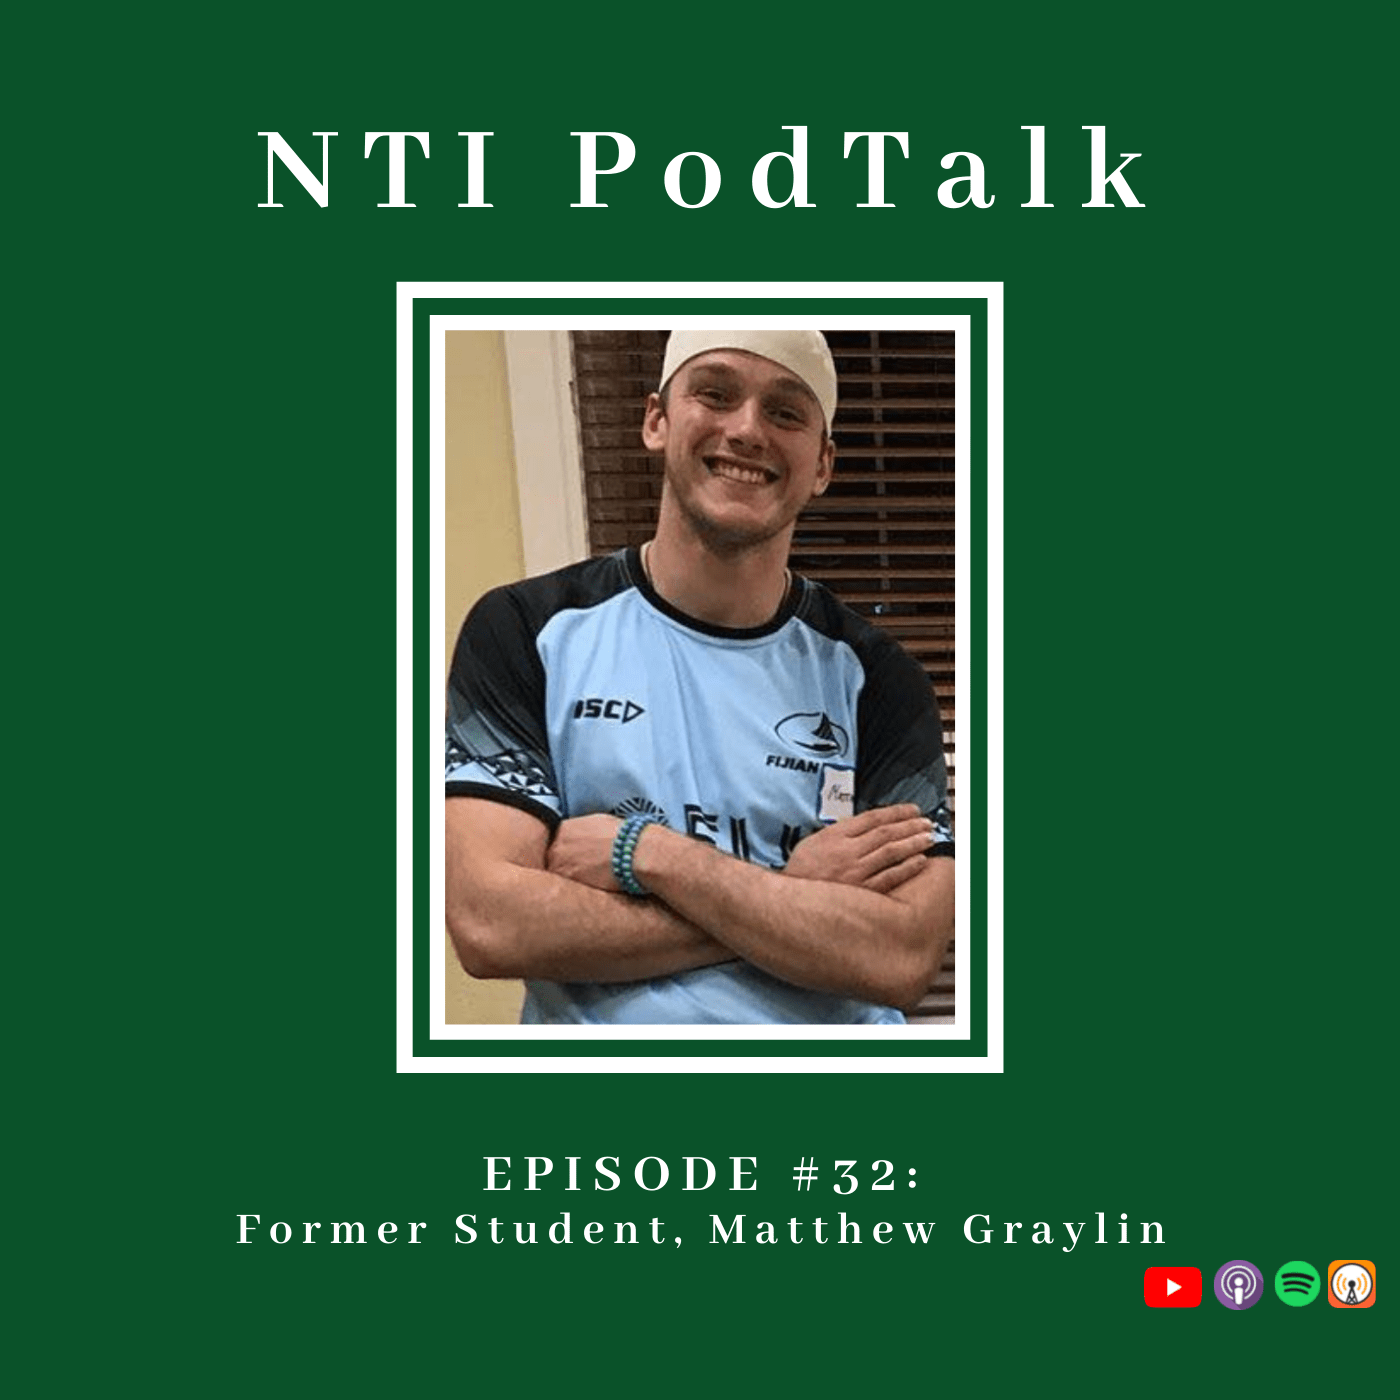 Featured image for “NTI PodTalk with Matthew Graylin”